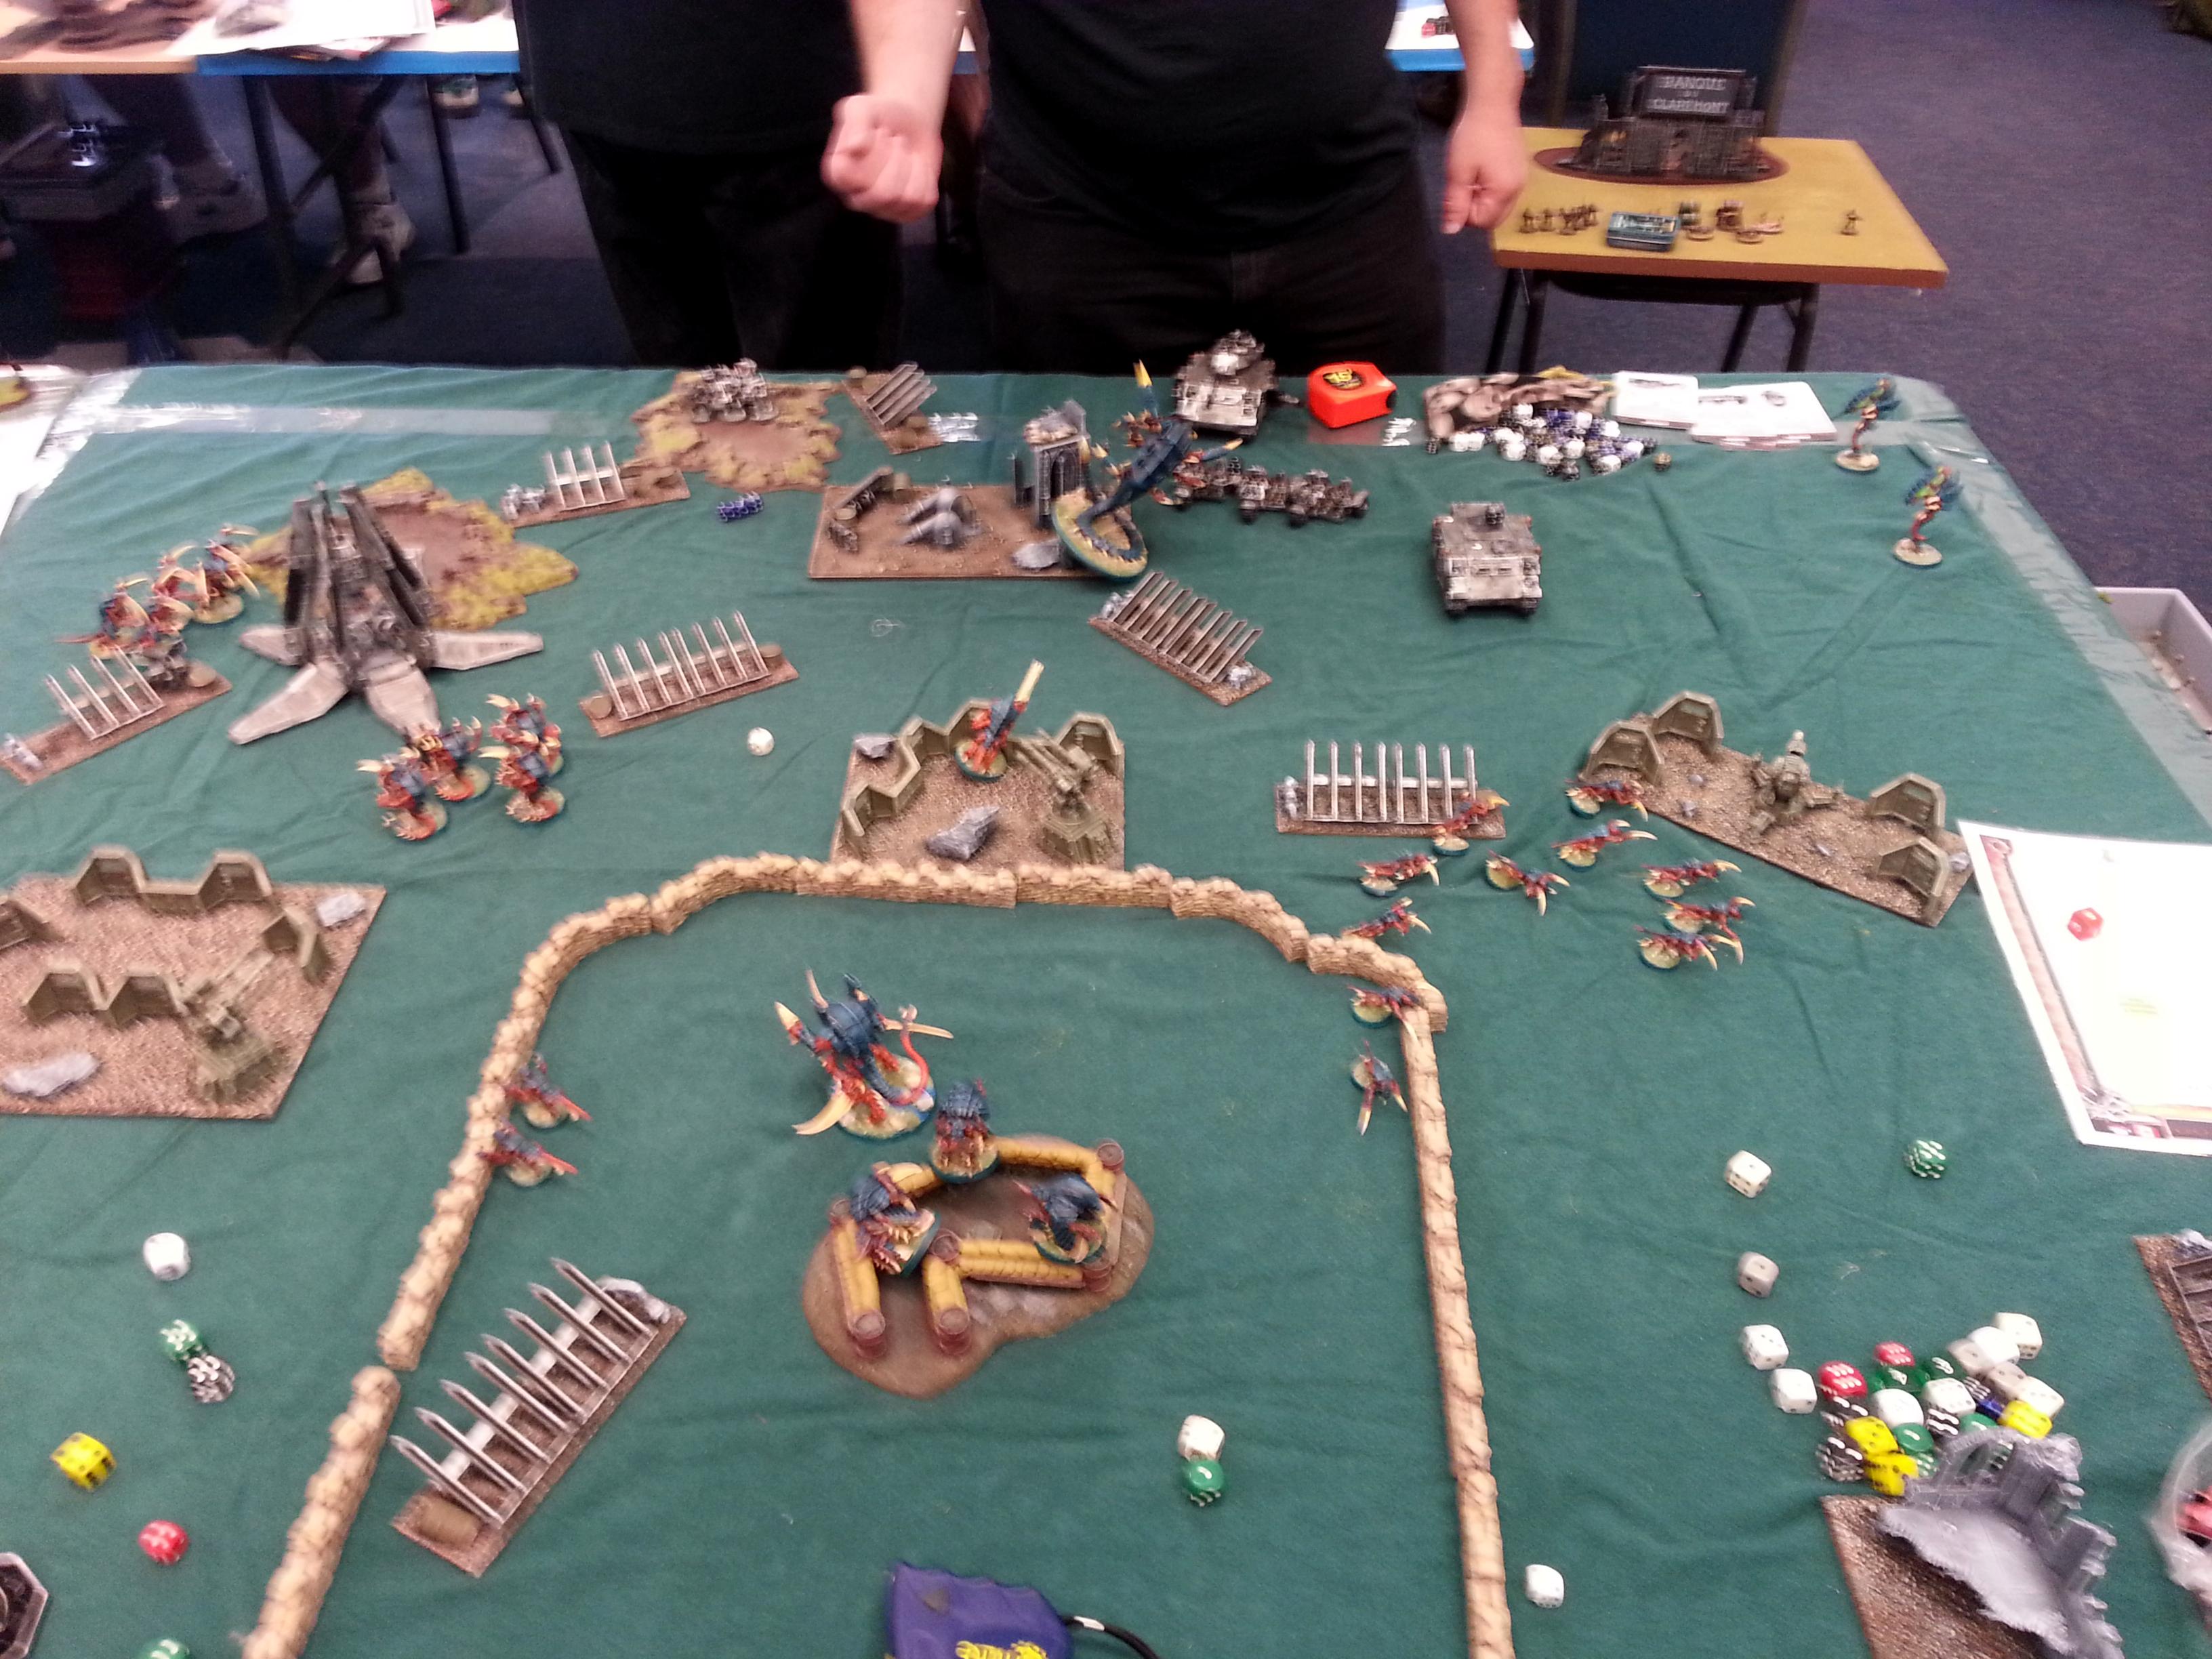 Turn 2a Tyranids: End of turn overview